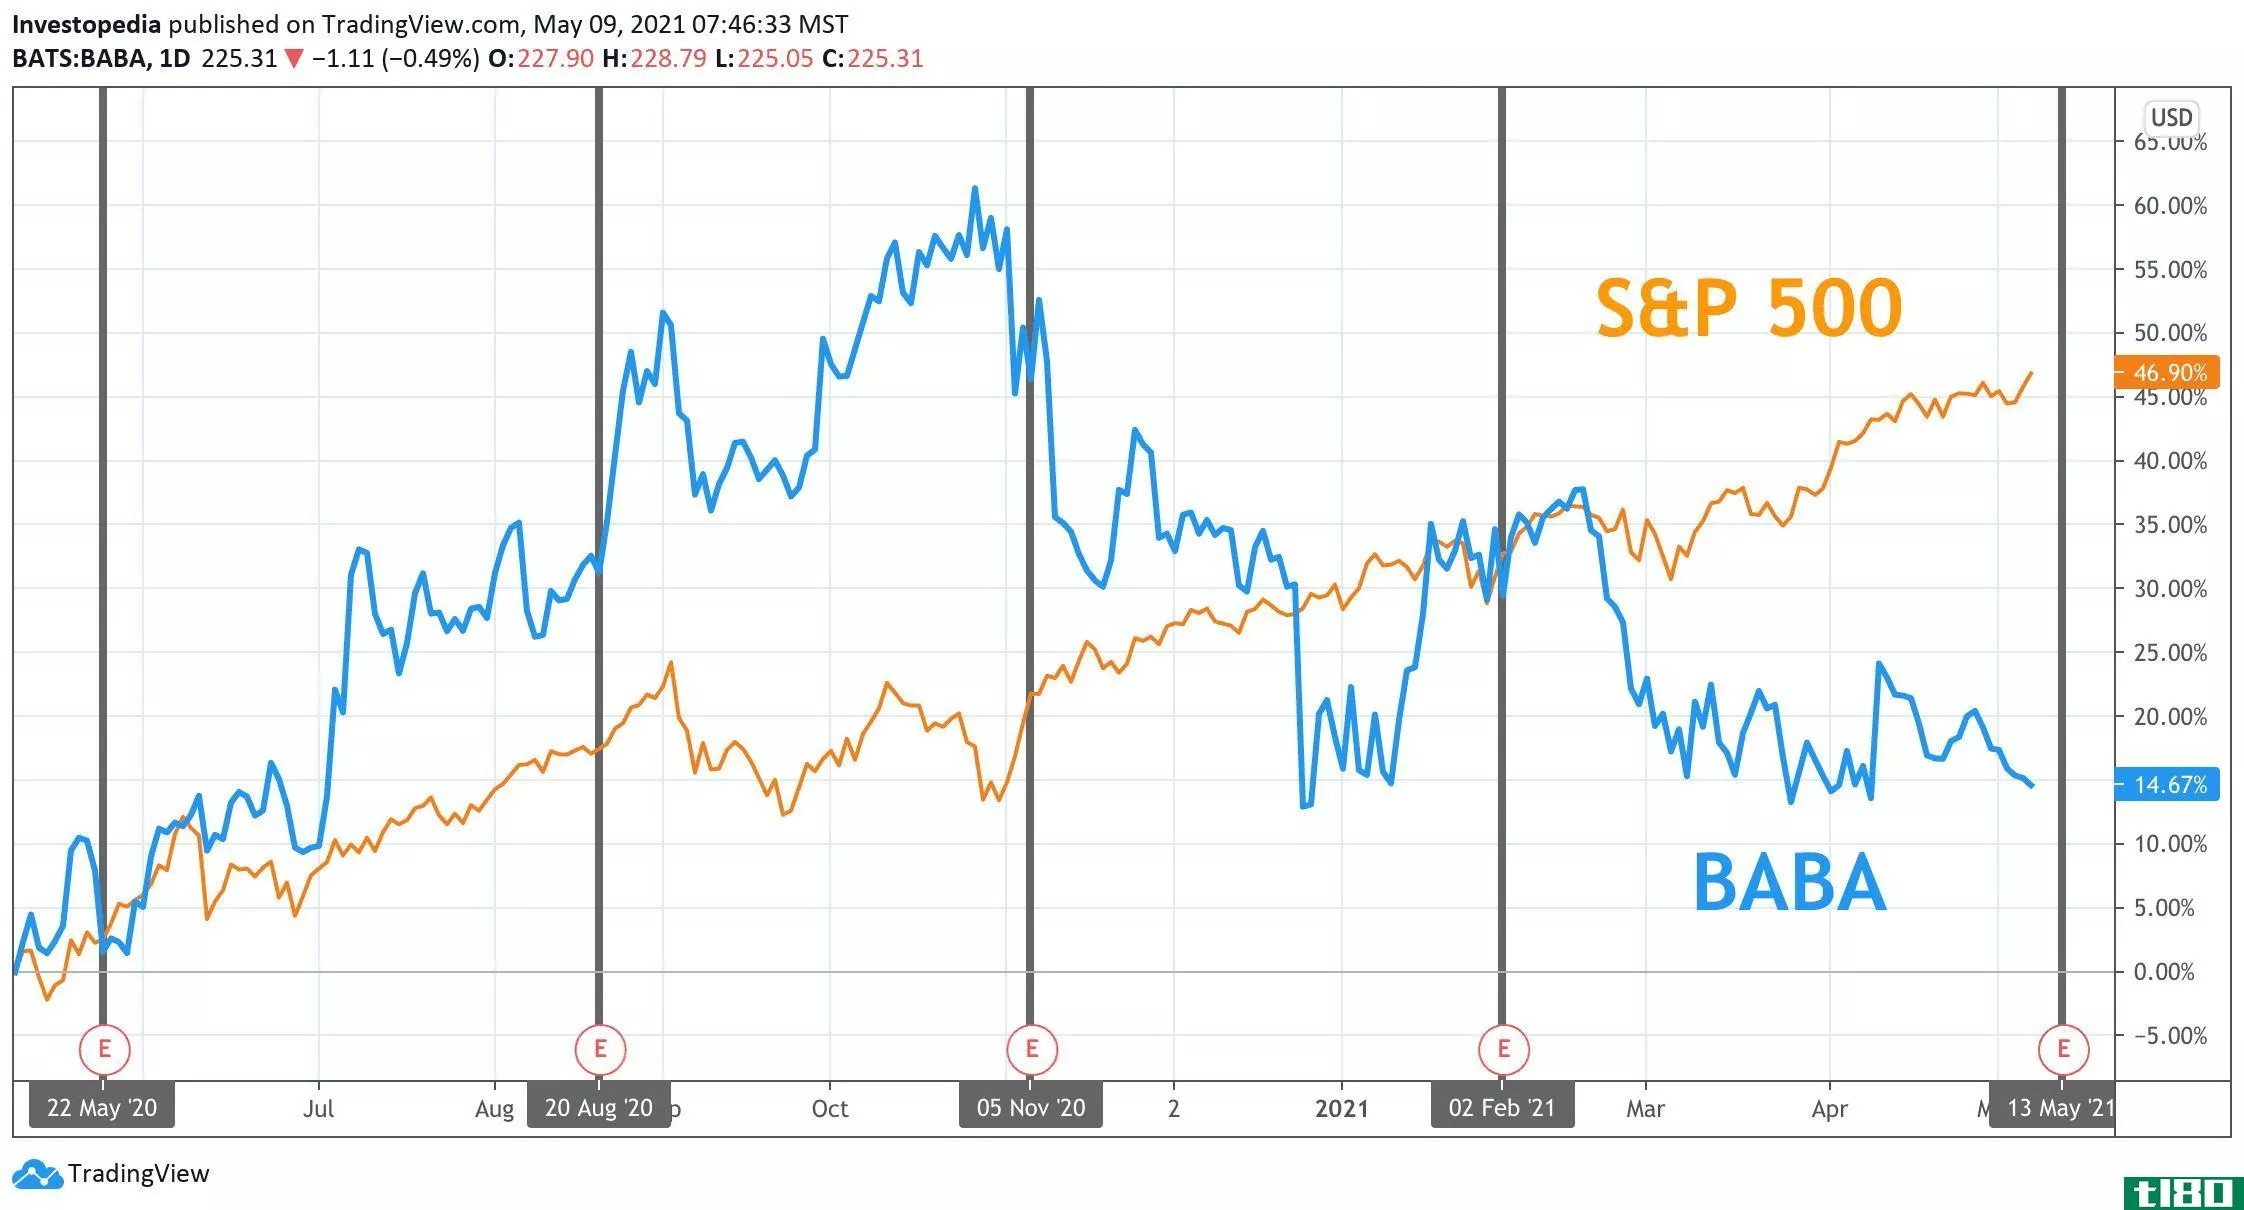 One Year Total Return for S&P 500 and Alibaba